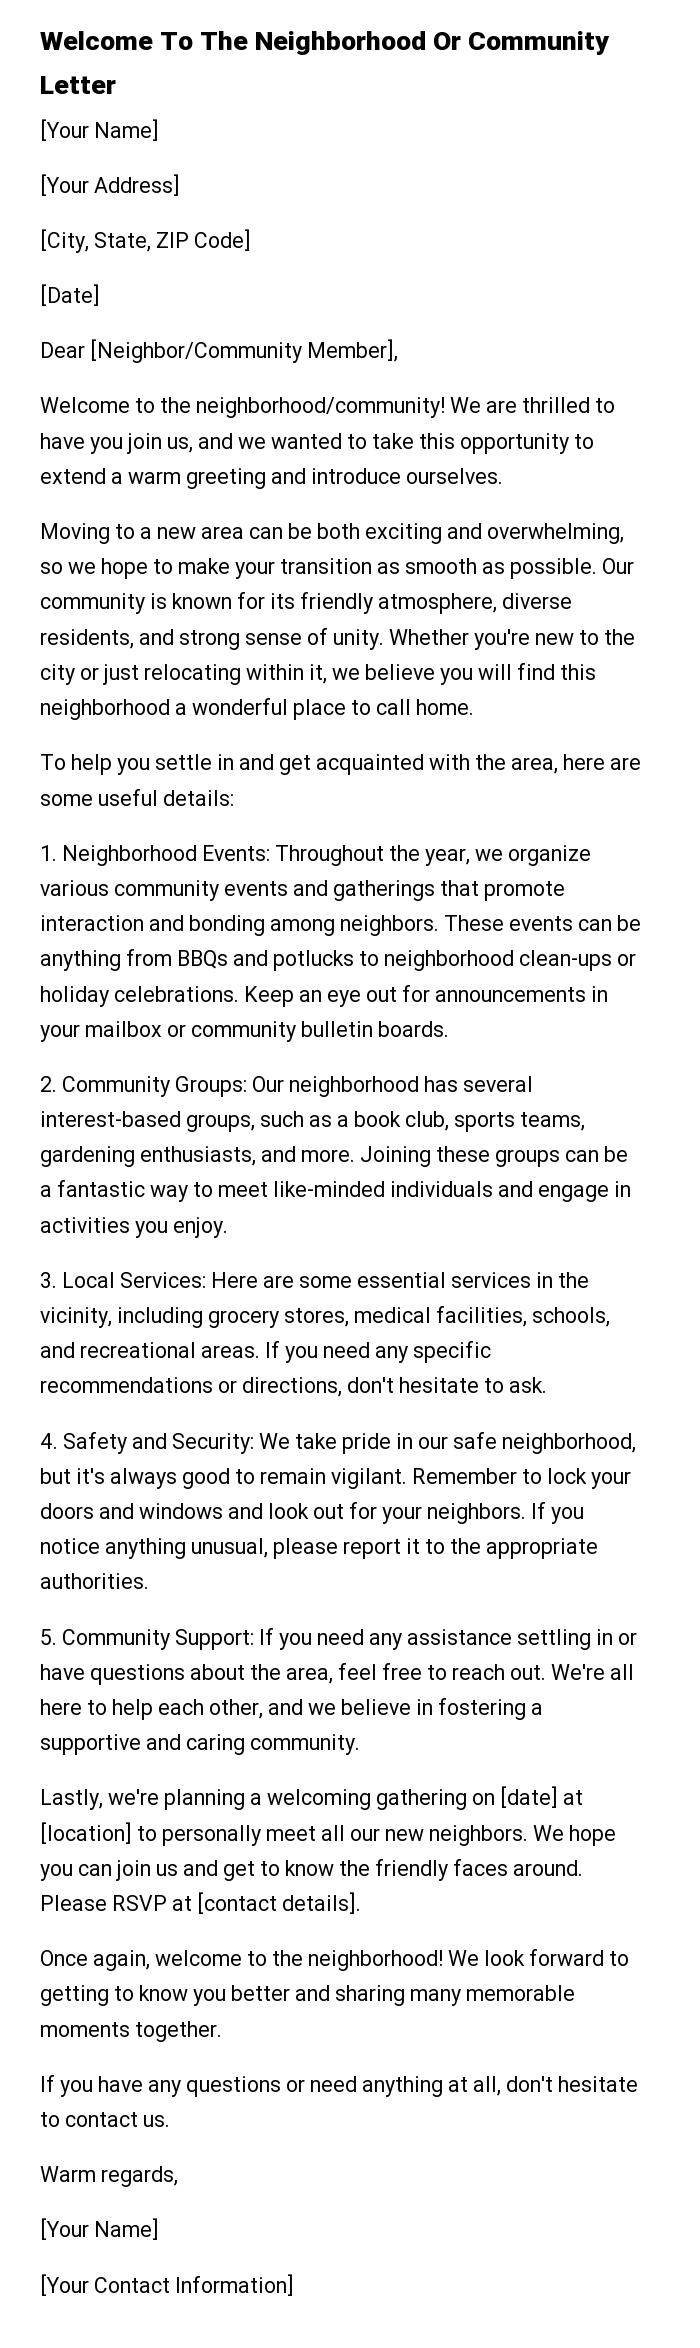 Welcome To The Neighborhood Or Community Letter